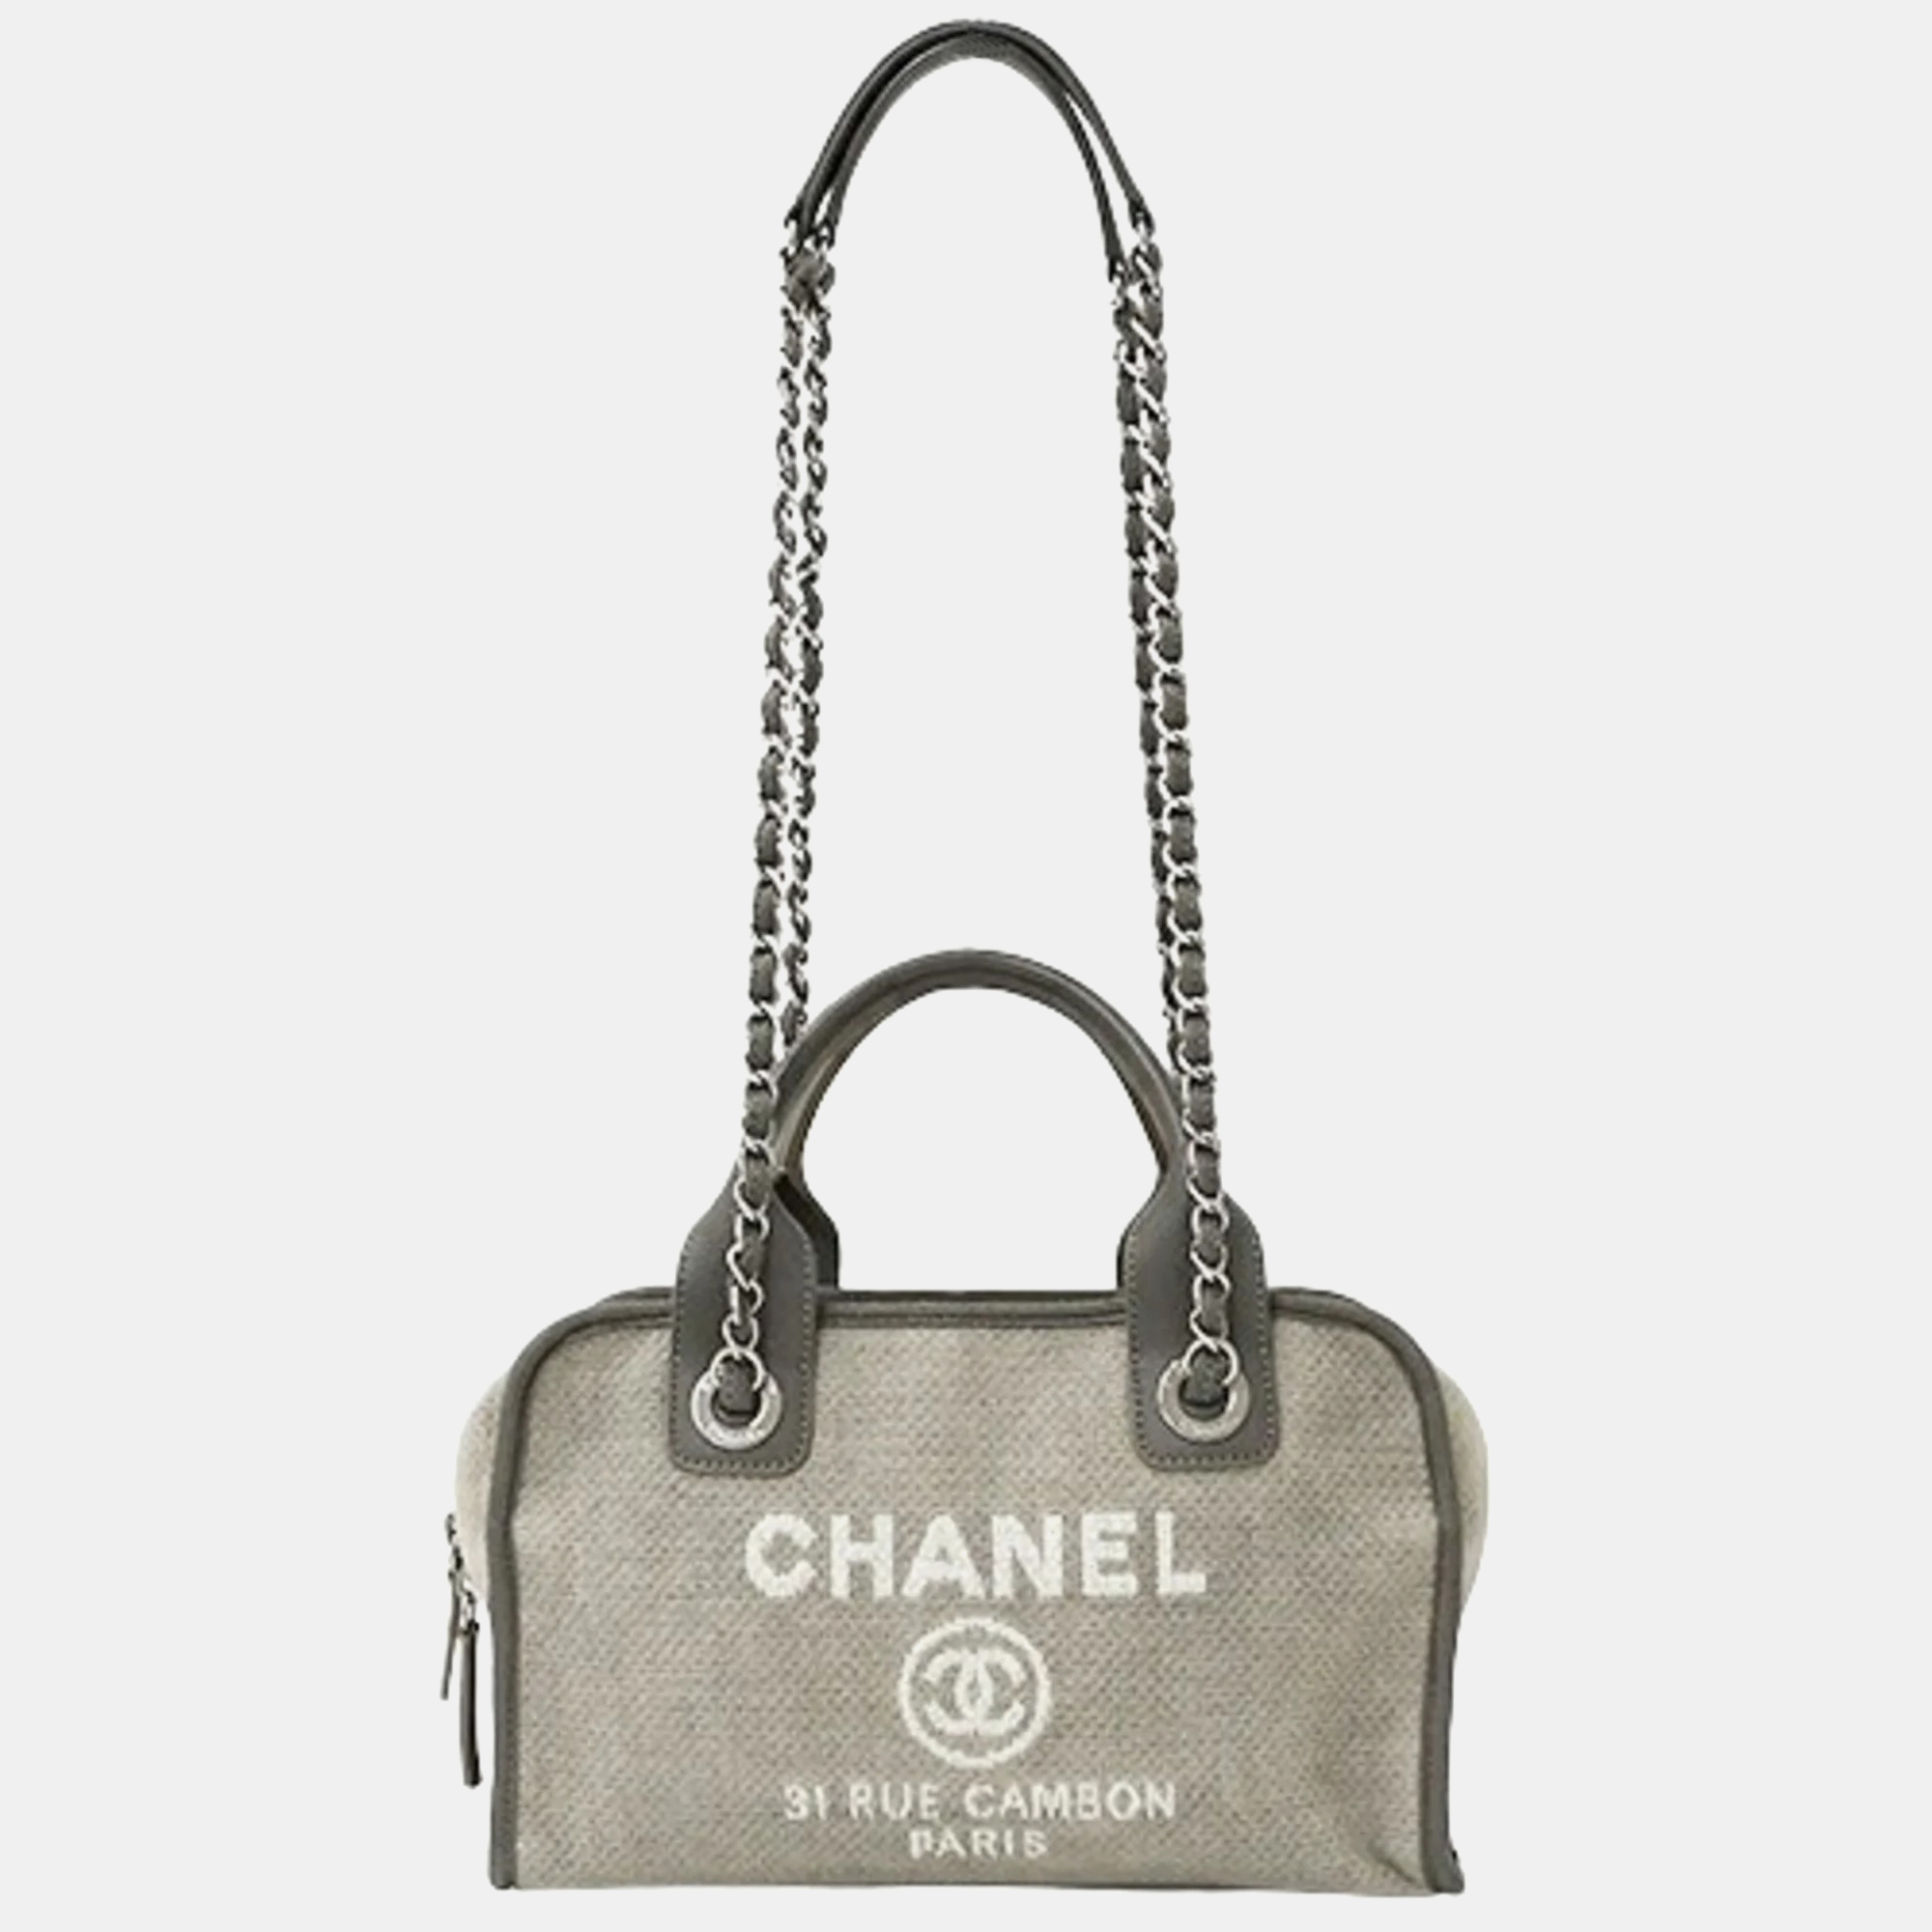 Chanel grey canvas small deauville tote bag